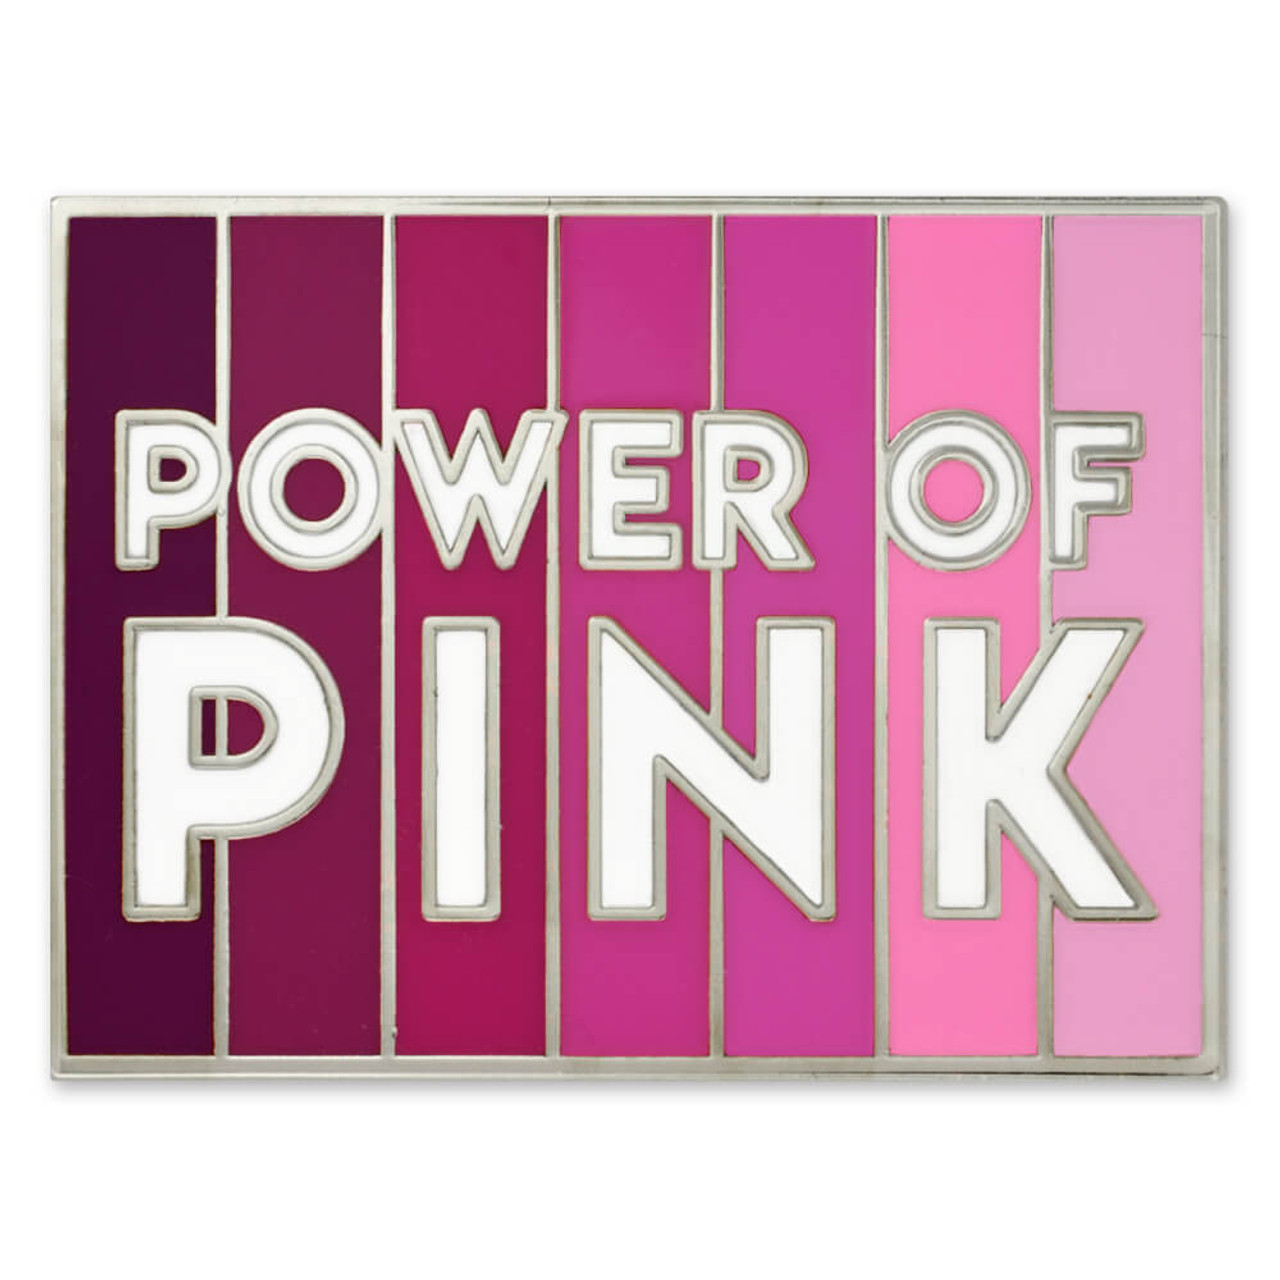 Pin on Pink, pink, pink And more pink